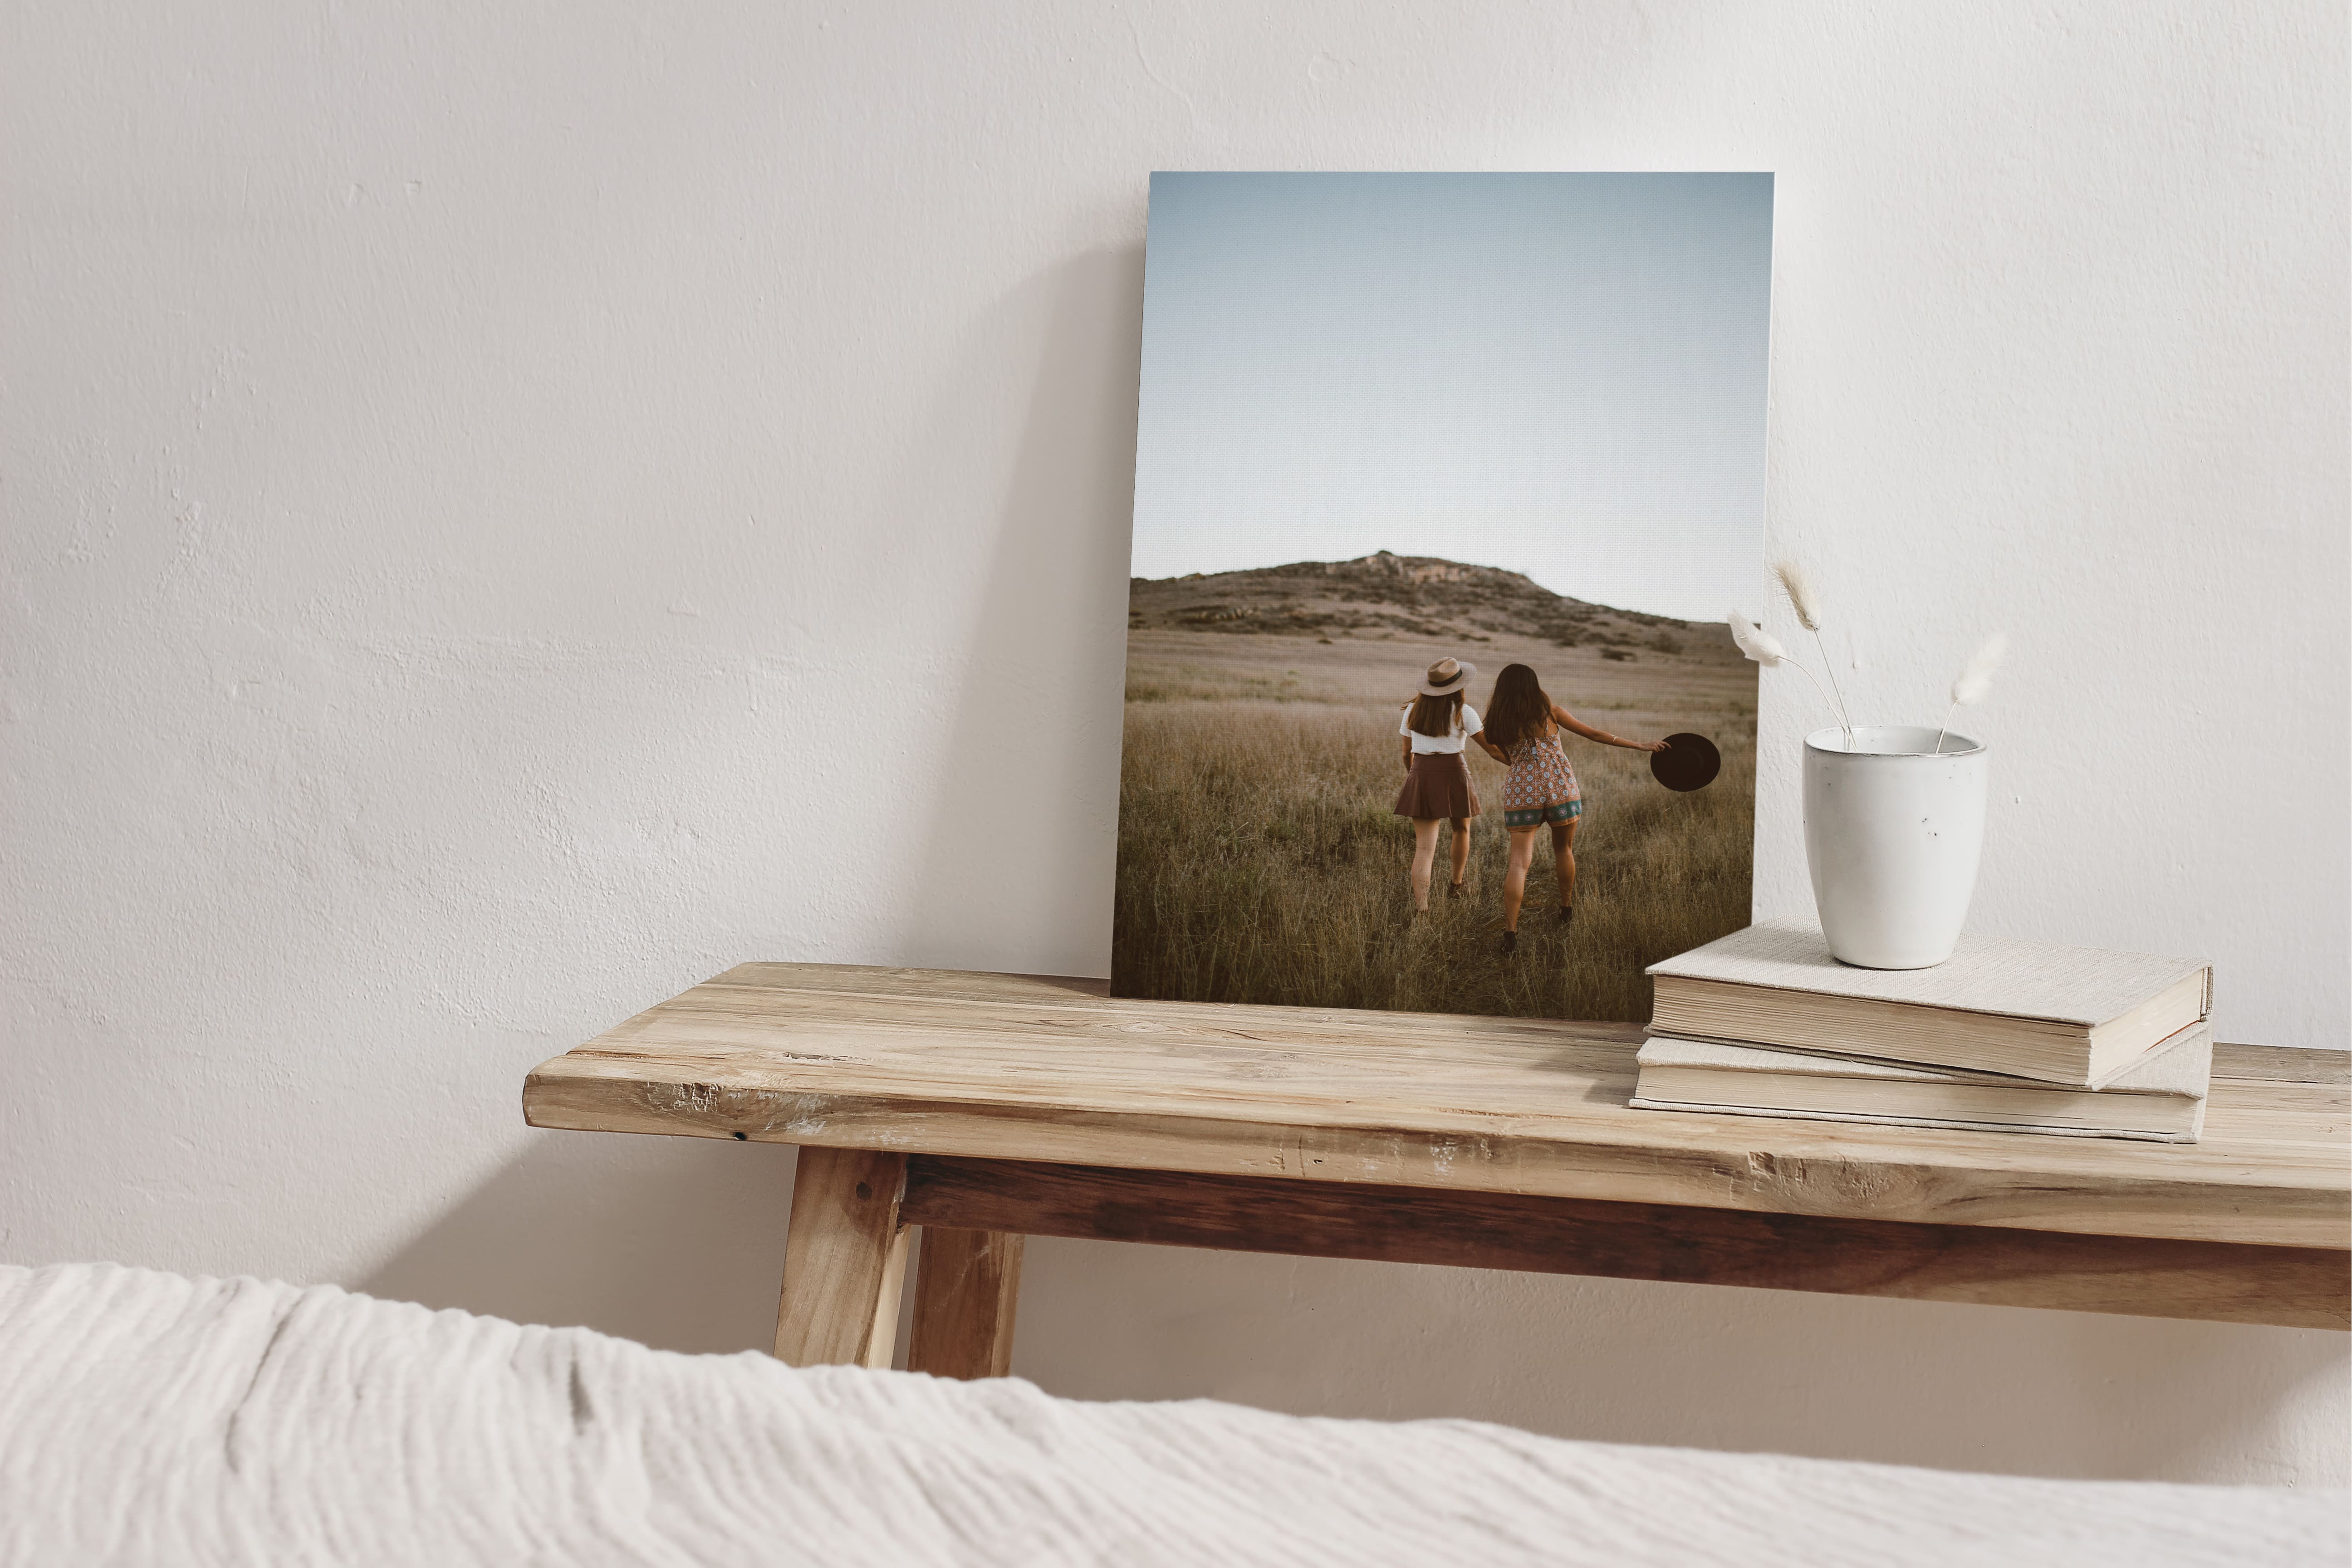 Canvas print on table of two friend exploring nature.